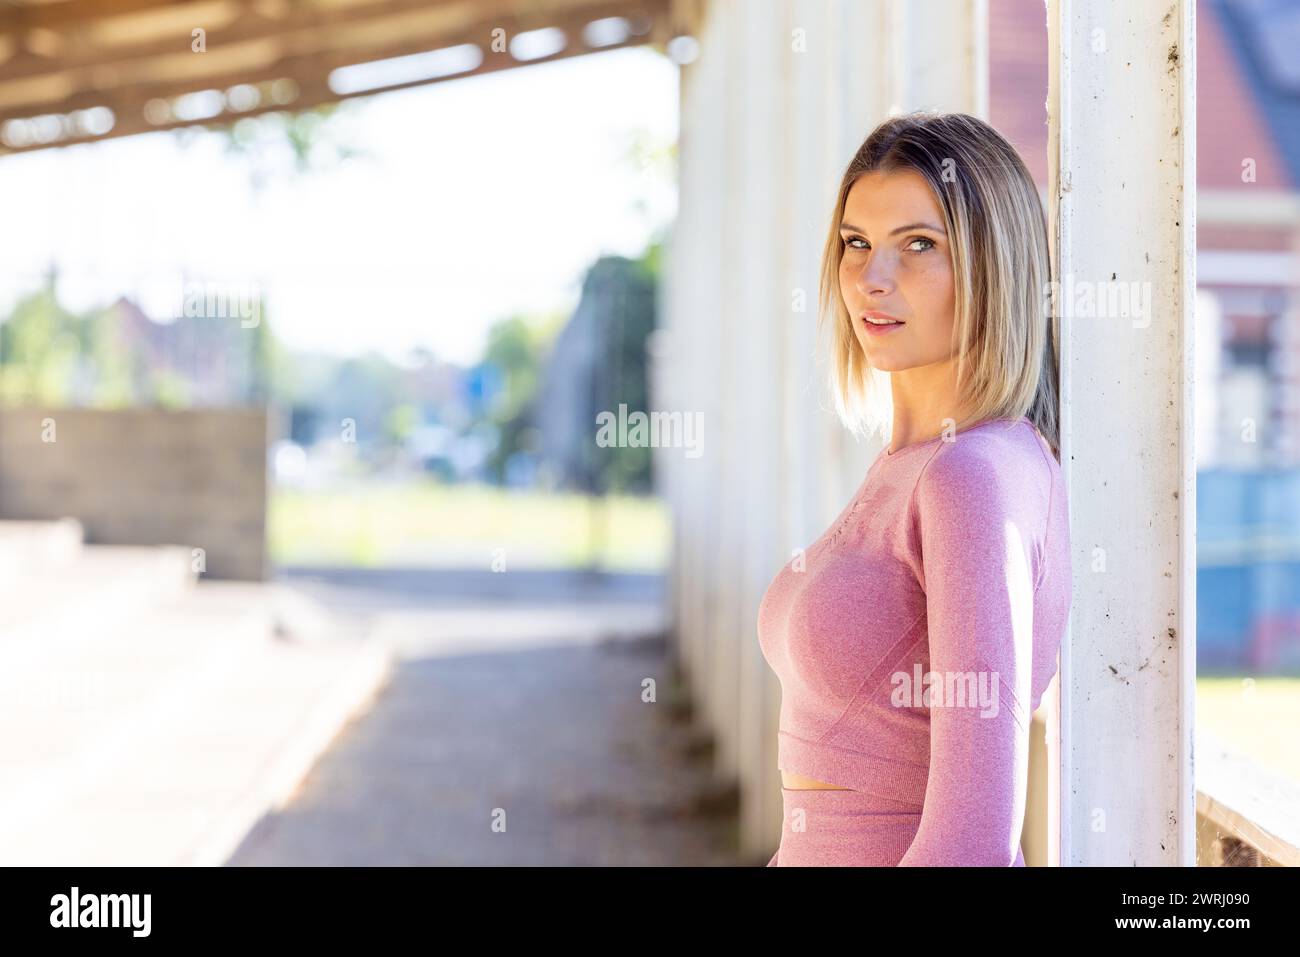 In the bright ambience of an urban space, a woman stands poised in form-fitting pink athletic attire, her focused expression capturing a moment of vigilance before activity. Urban Fitness Vigilance: Woman in Pink Athletic Attire Poised for Action. High quality photo Stock Photo